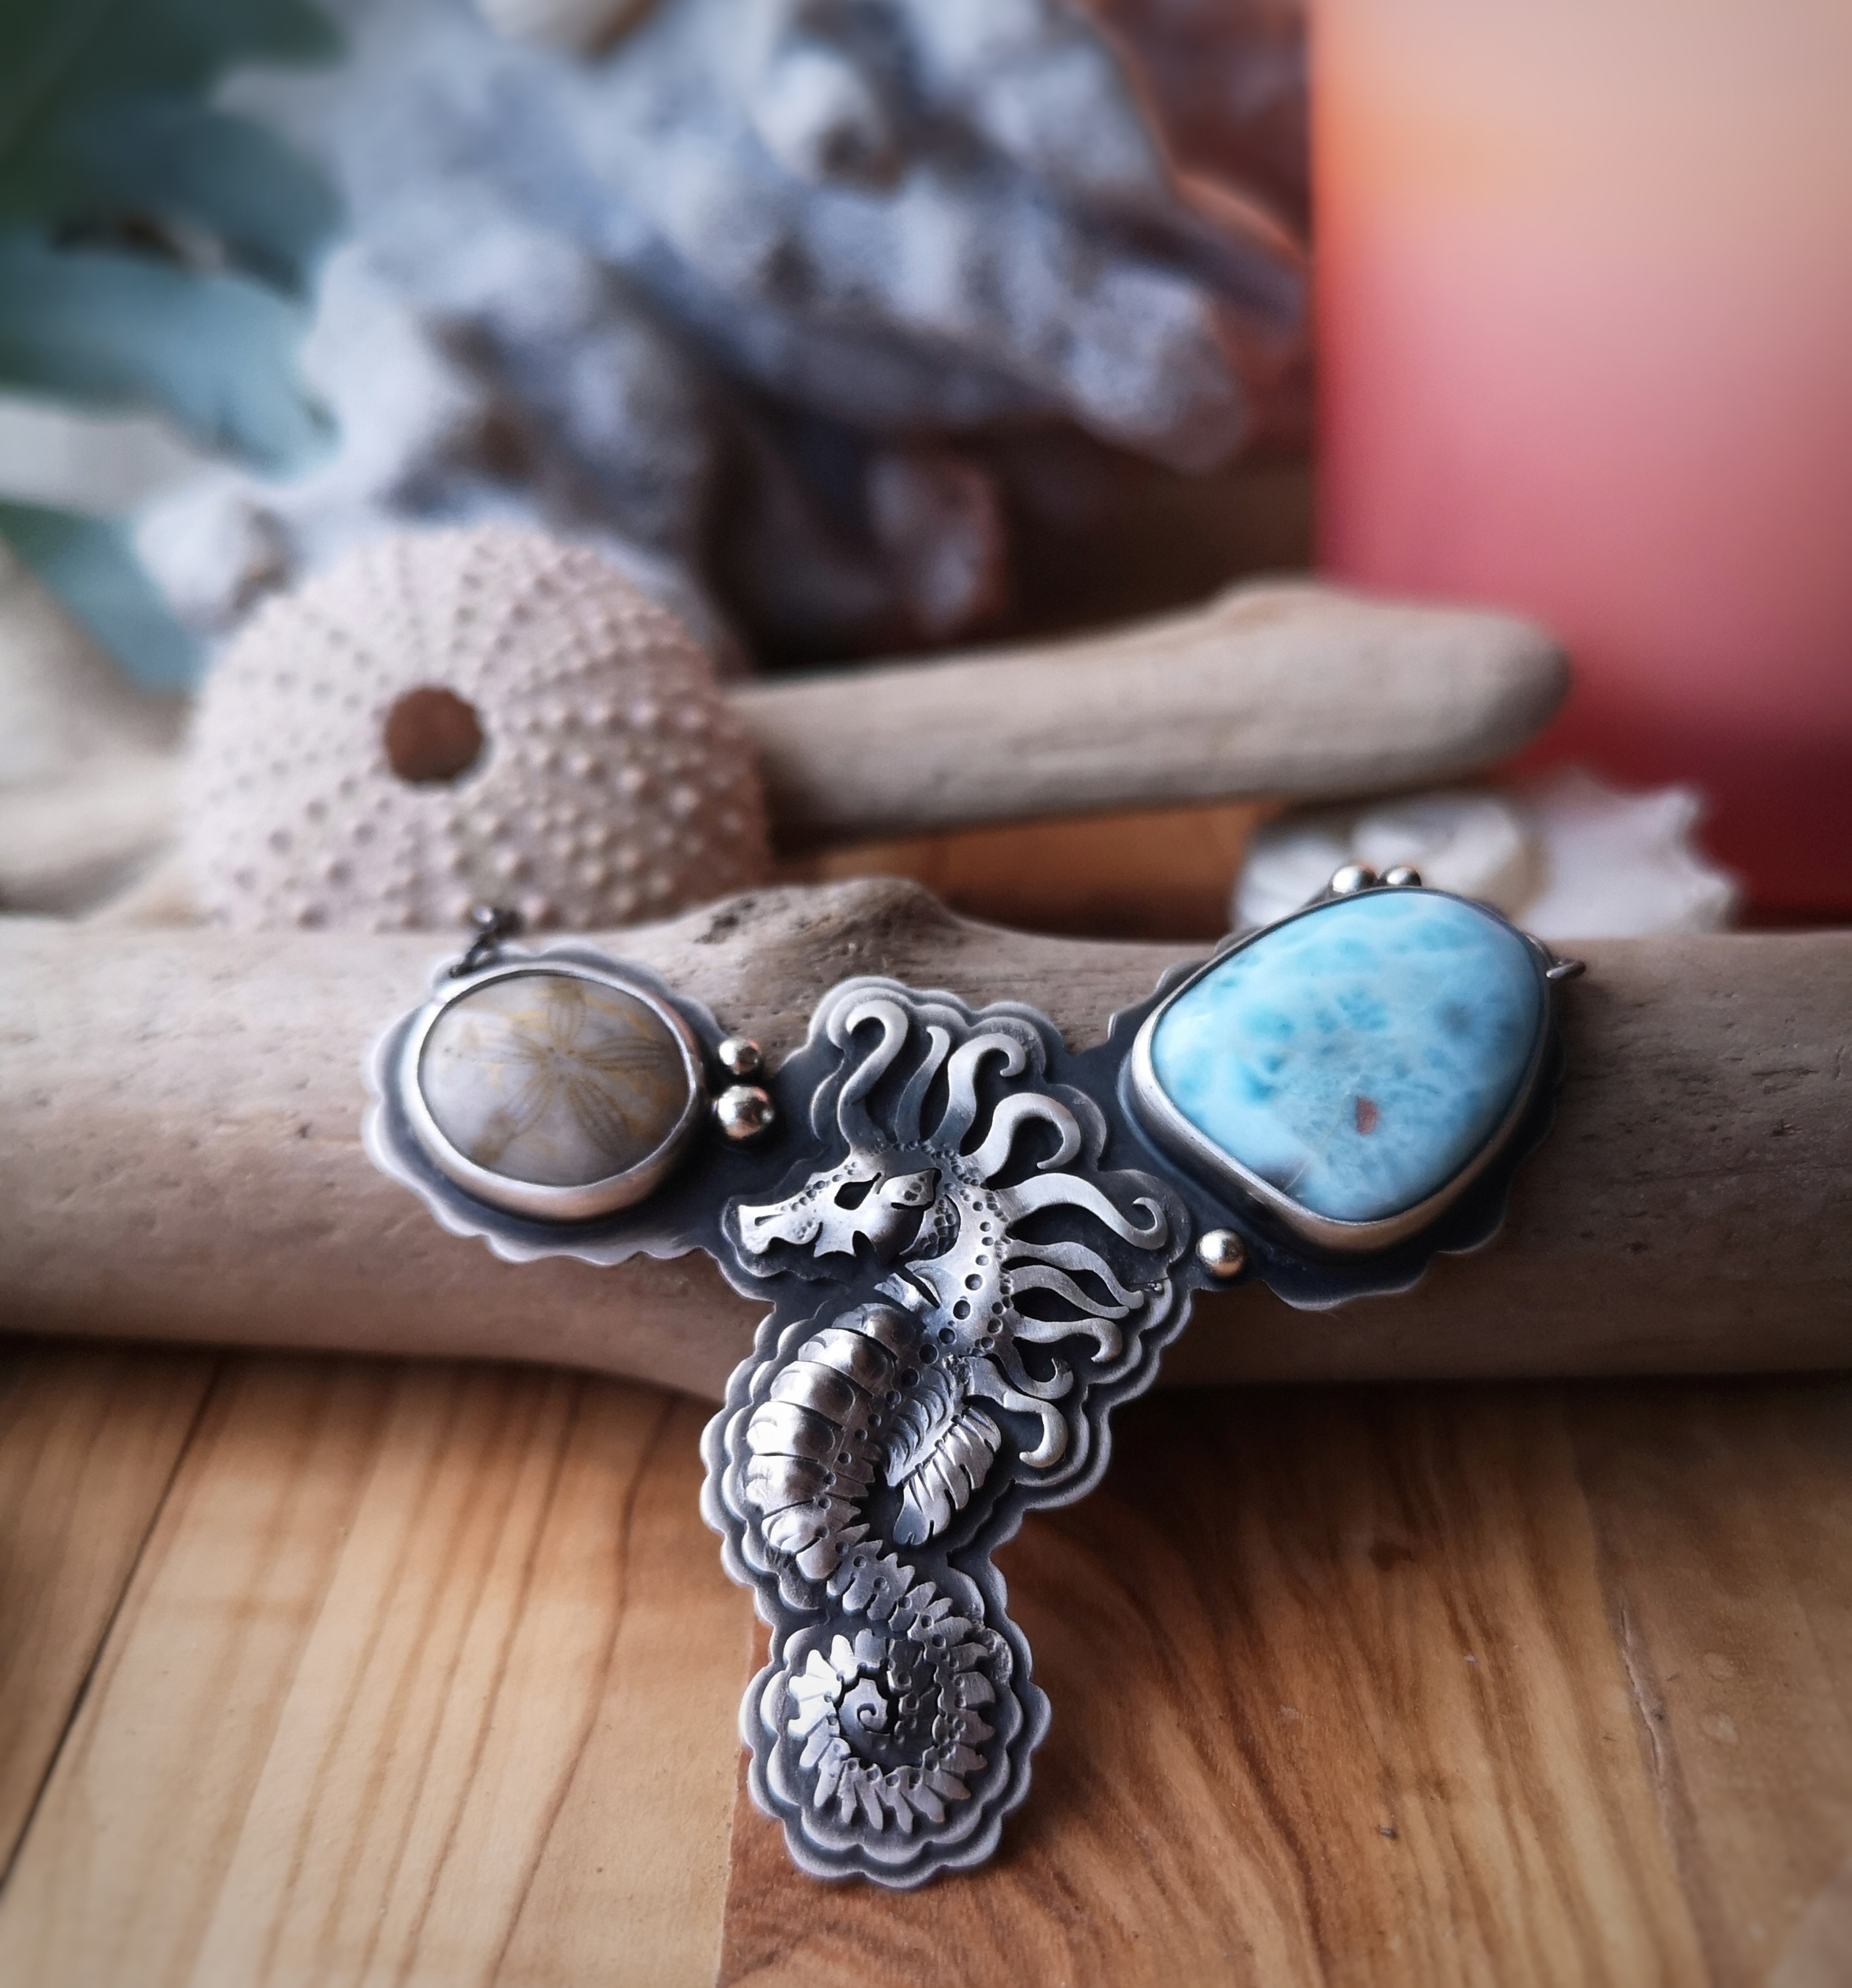 The Seahorse Necklace